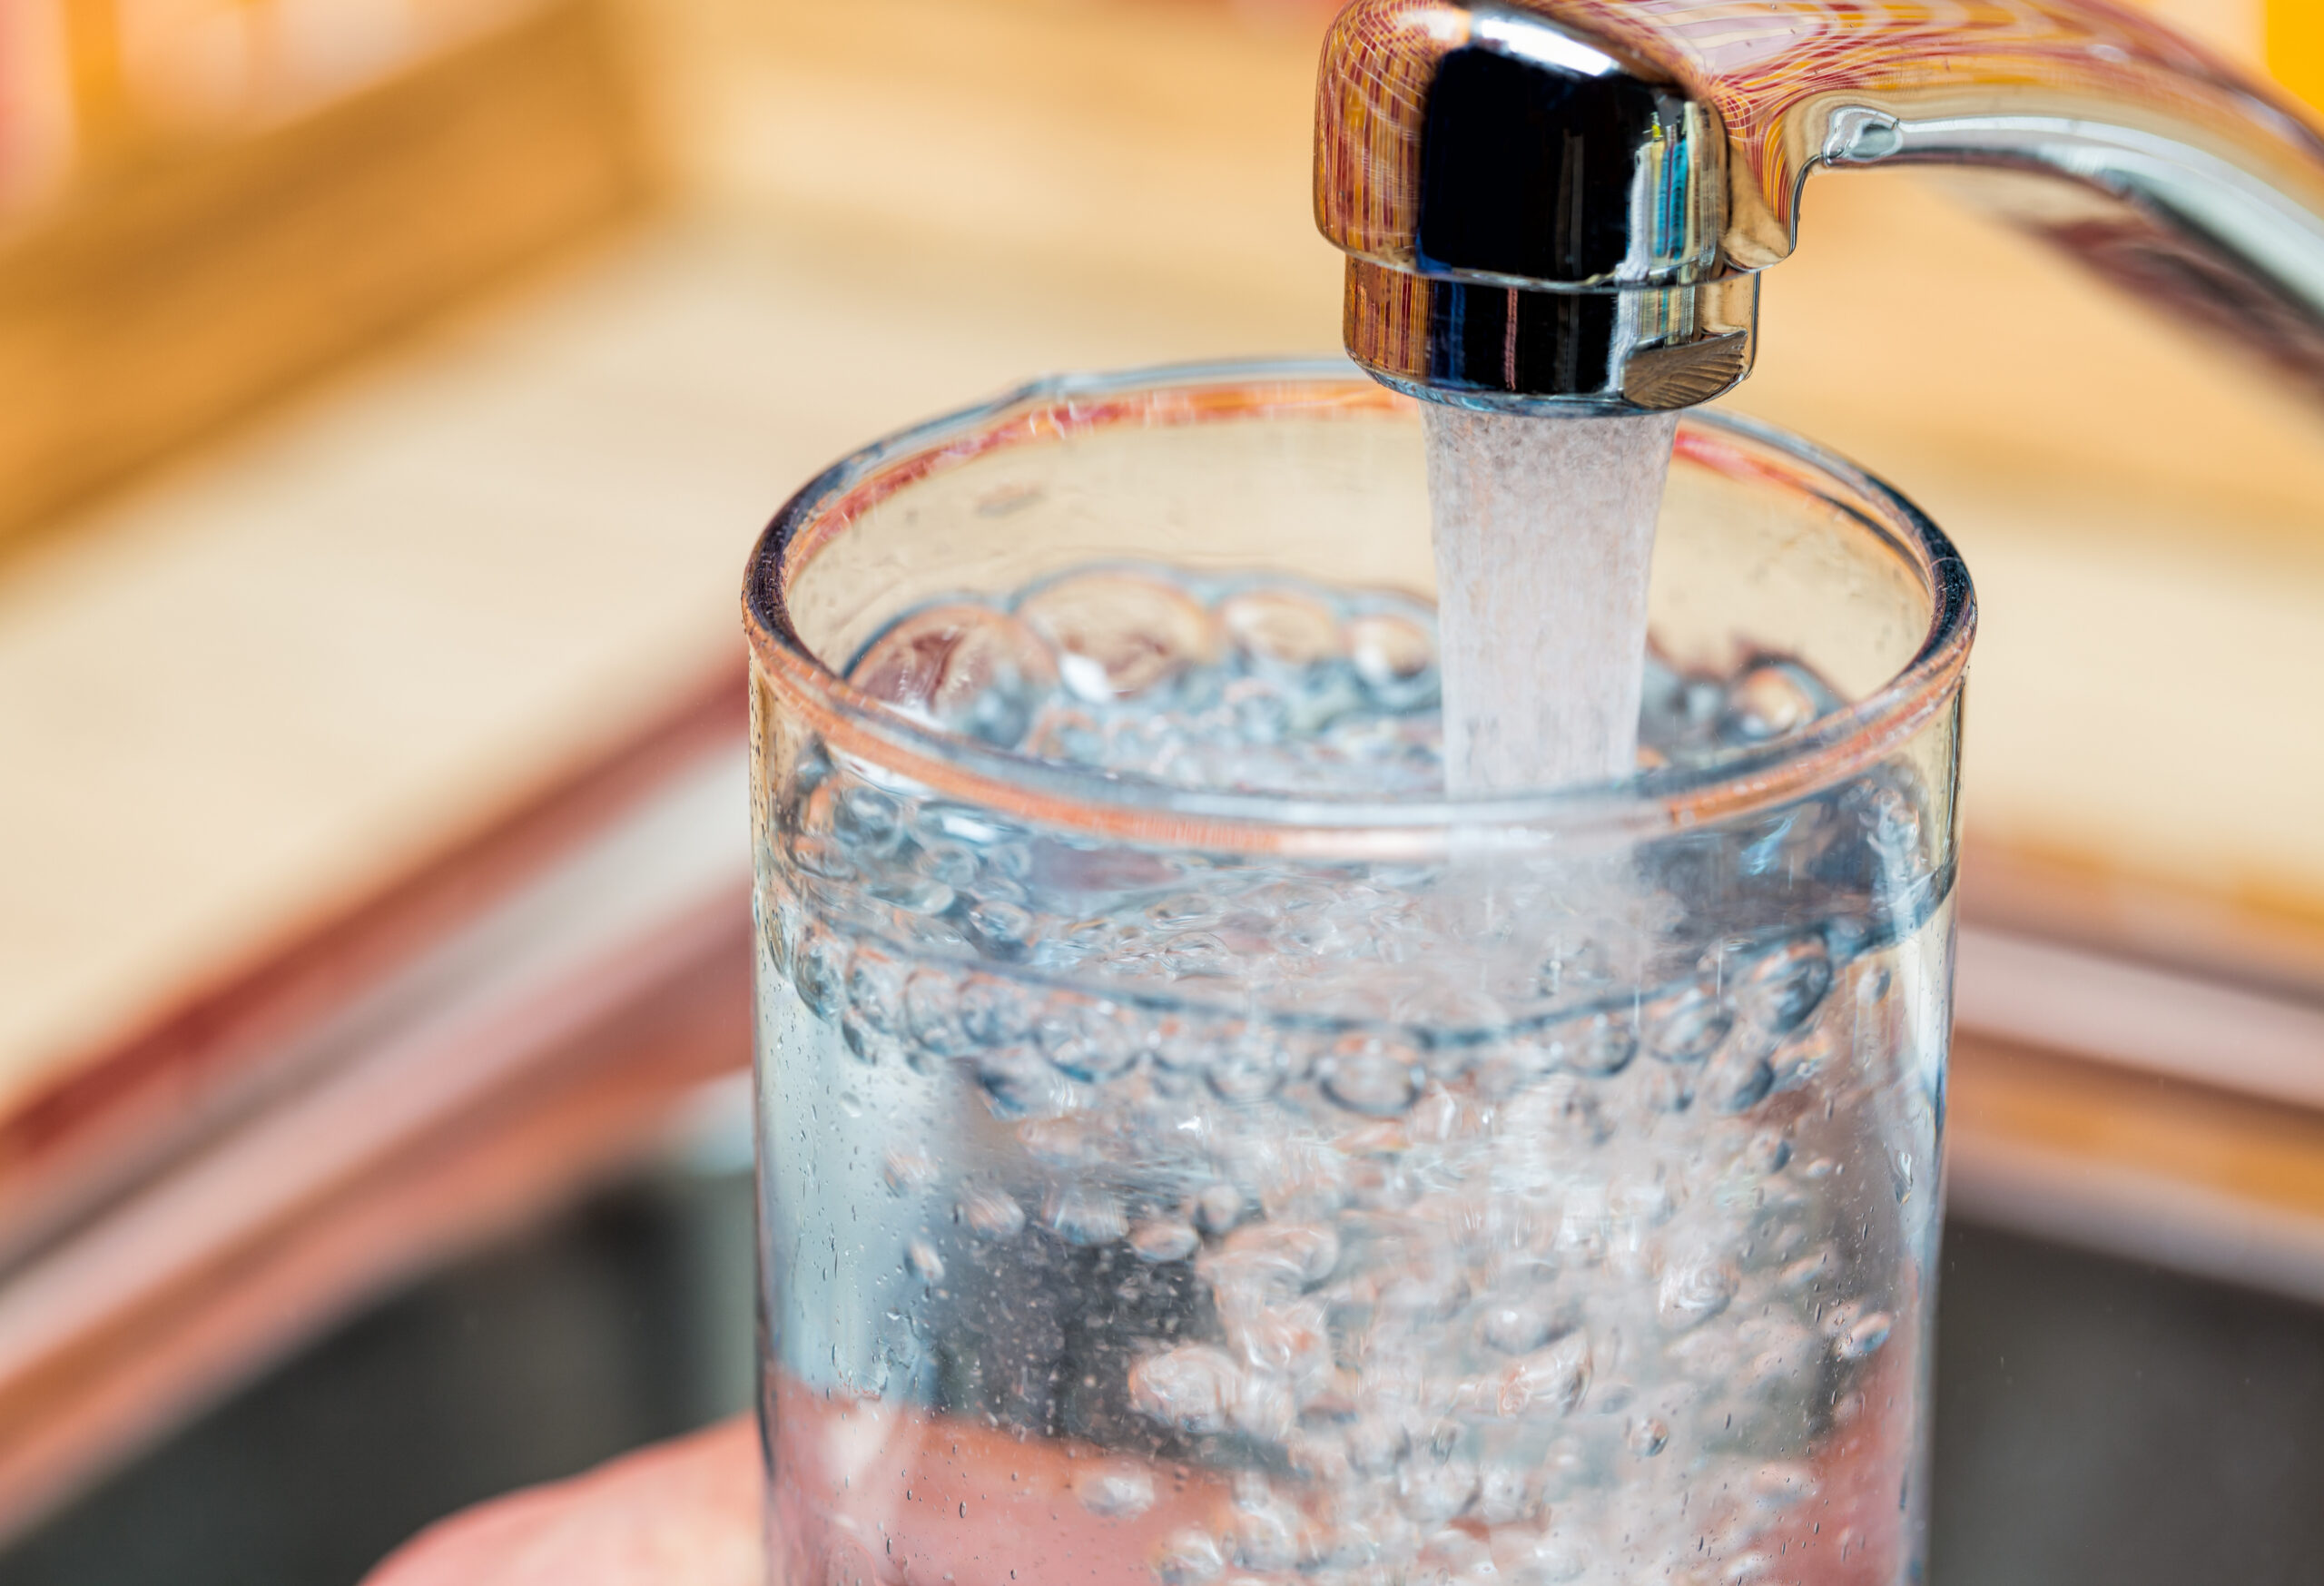 Excess fluoride linked to cognitive impairment in children